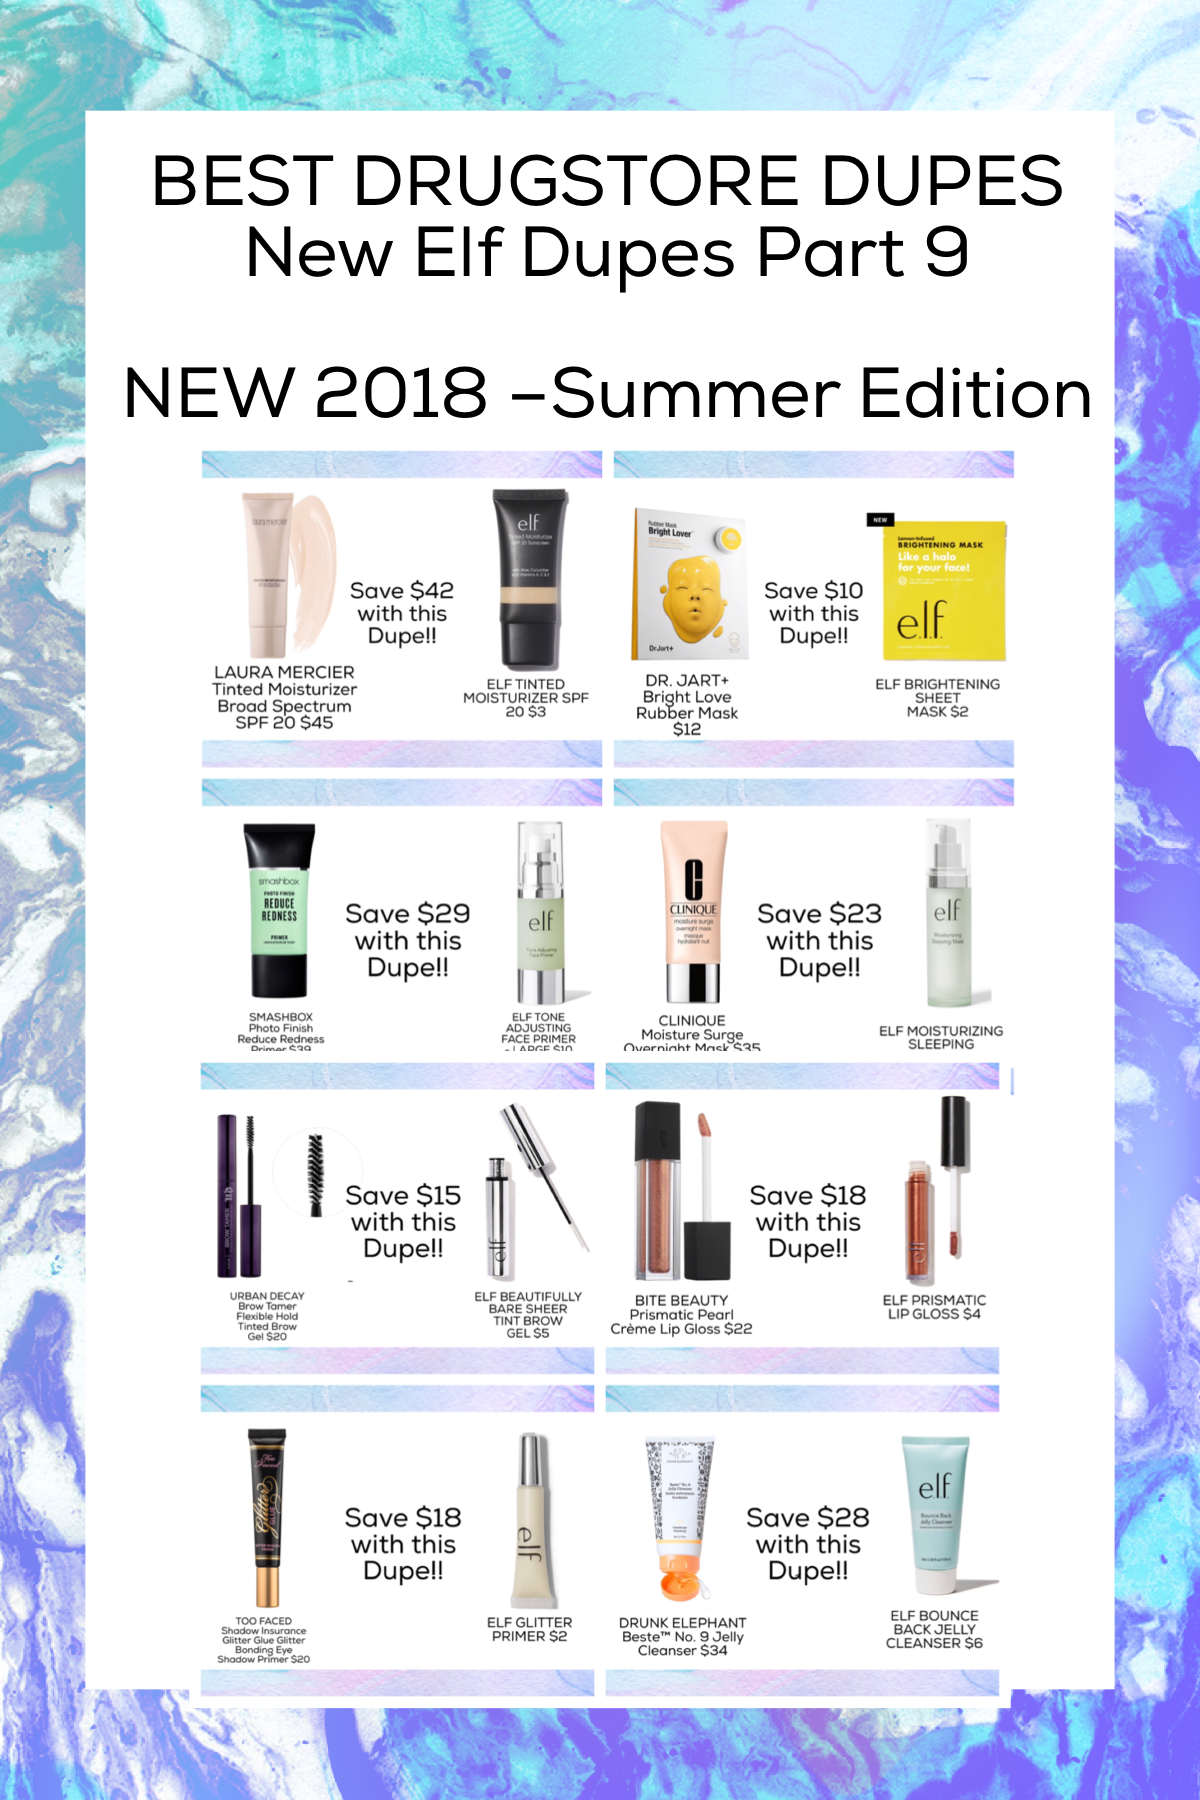 BEST DRUGSTORE DUPES  New Elf Dupes Part 9  NEW 2018 –Summer Edition – Dupes for Drunk Elephant, Too Faced, Bite Beauty, Clinique, and more!